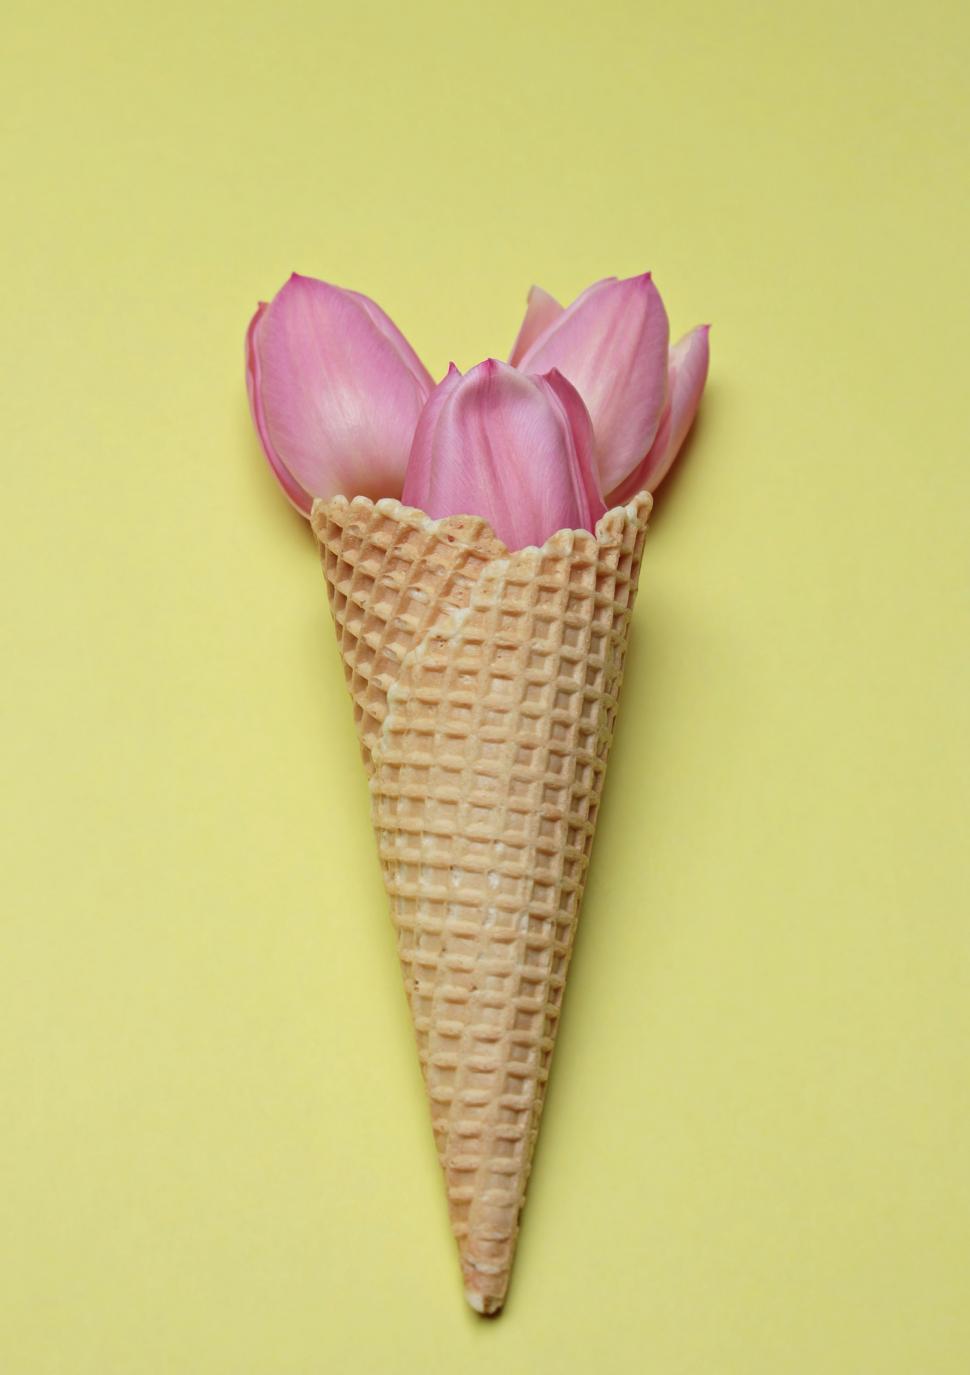 Free Image of Ice cream cone and flowers 